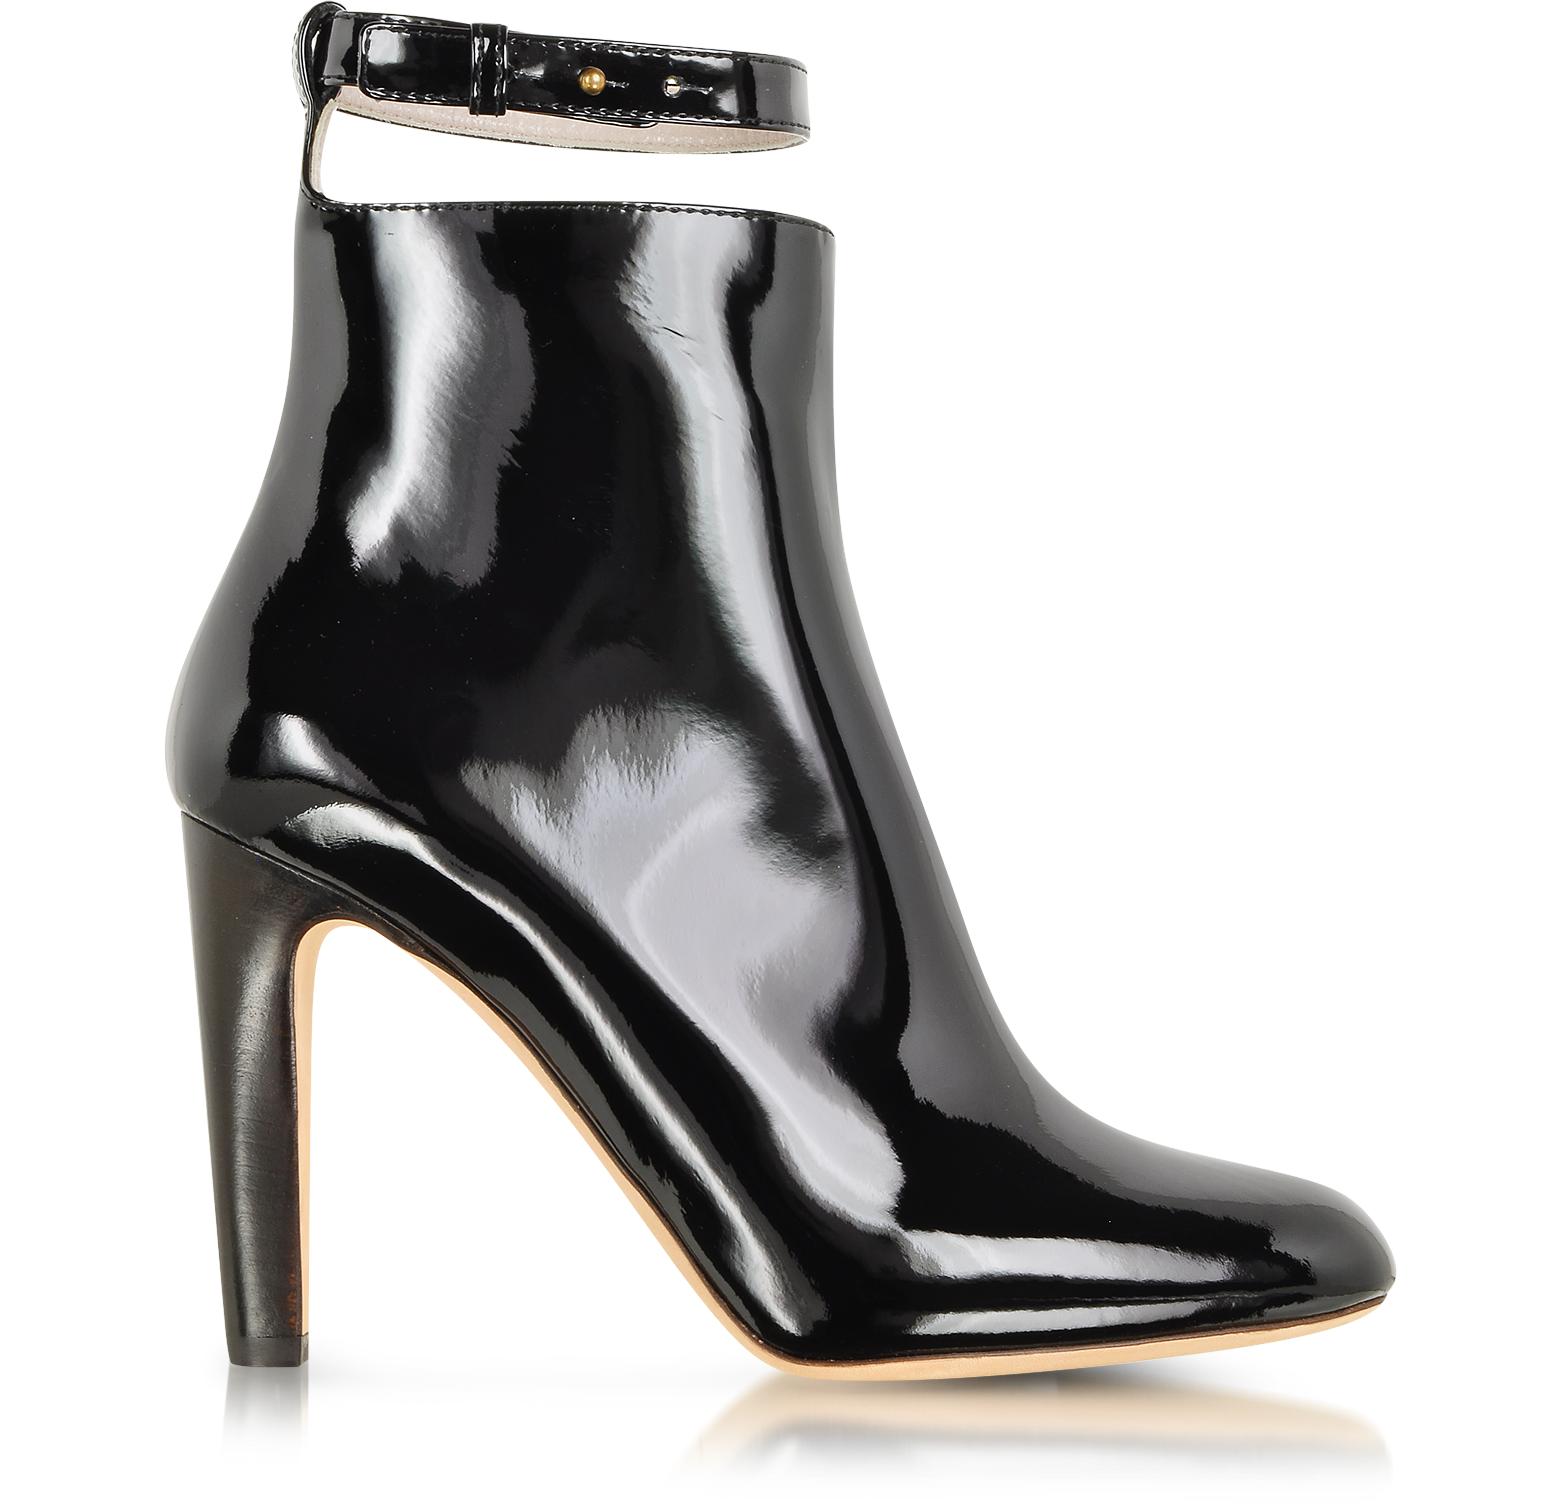 Marc Jacobs Black Patent Leather Ankle Strap Boot 36 IT/EU at FORZIERI